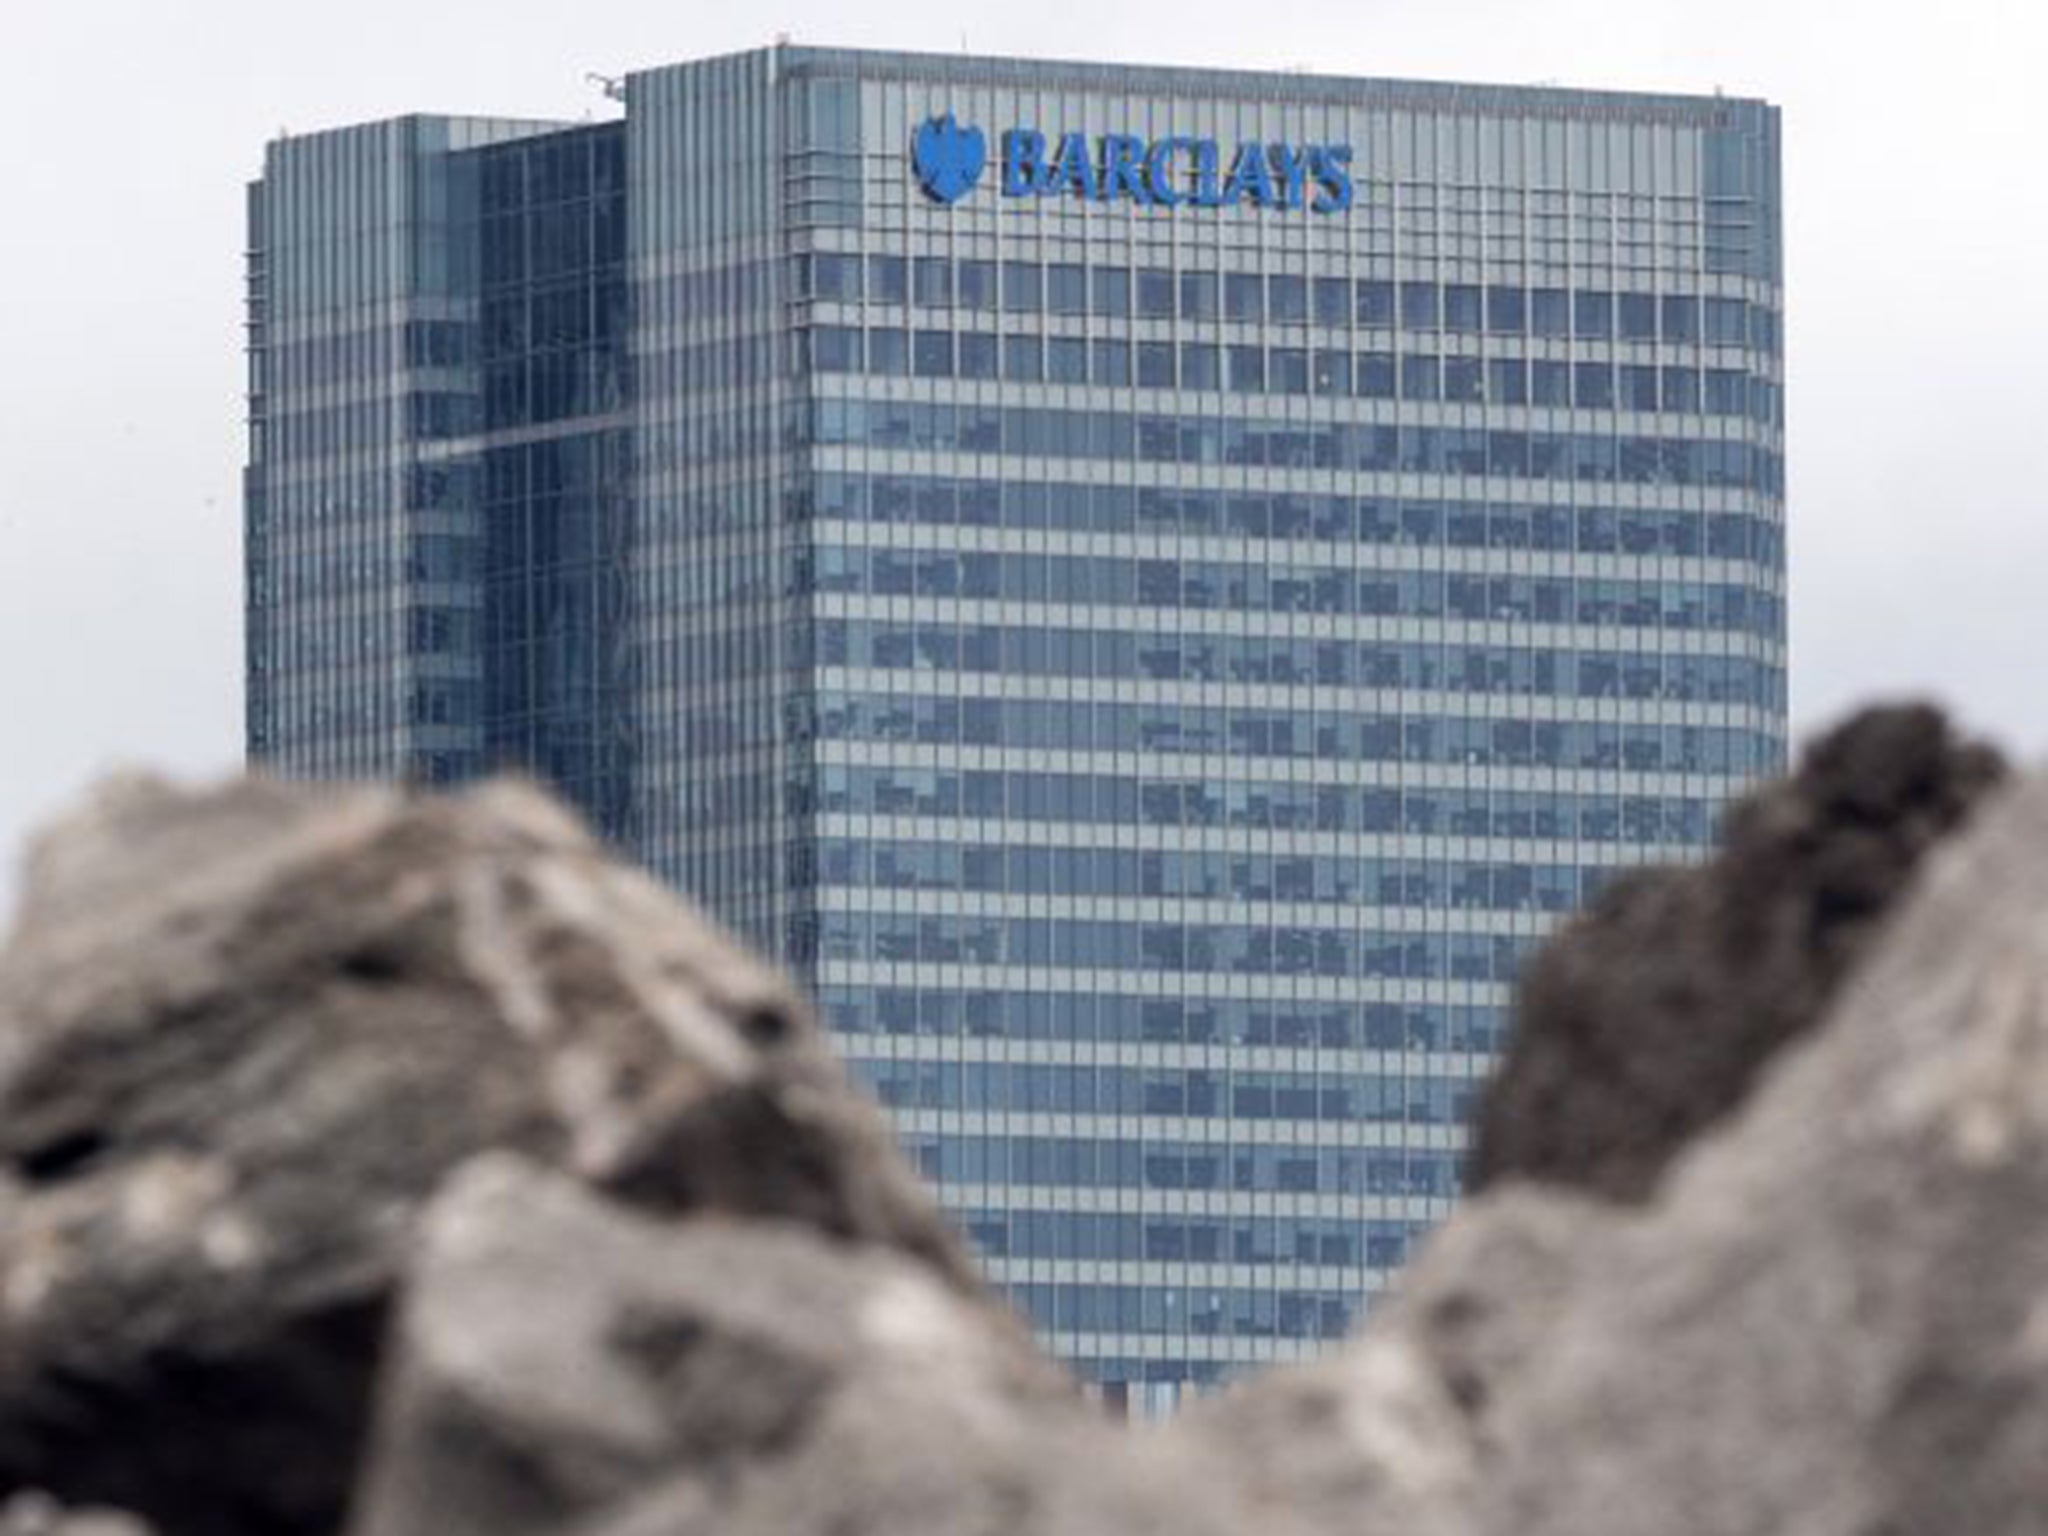 Barclays was hit with a £72m fine for failing to carry out proper checks when a single client from the Middle East brought a £1.9bn deal into the bank